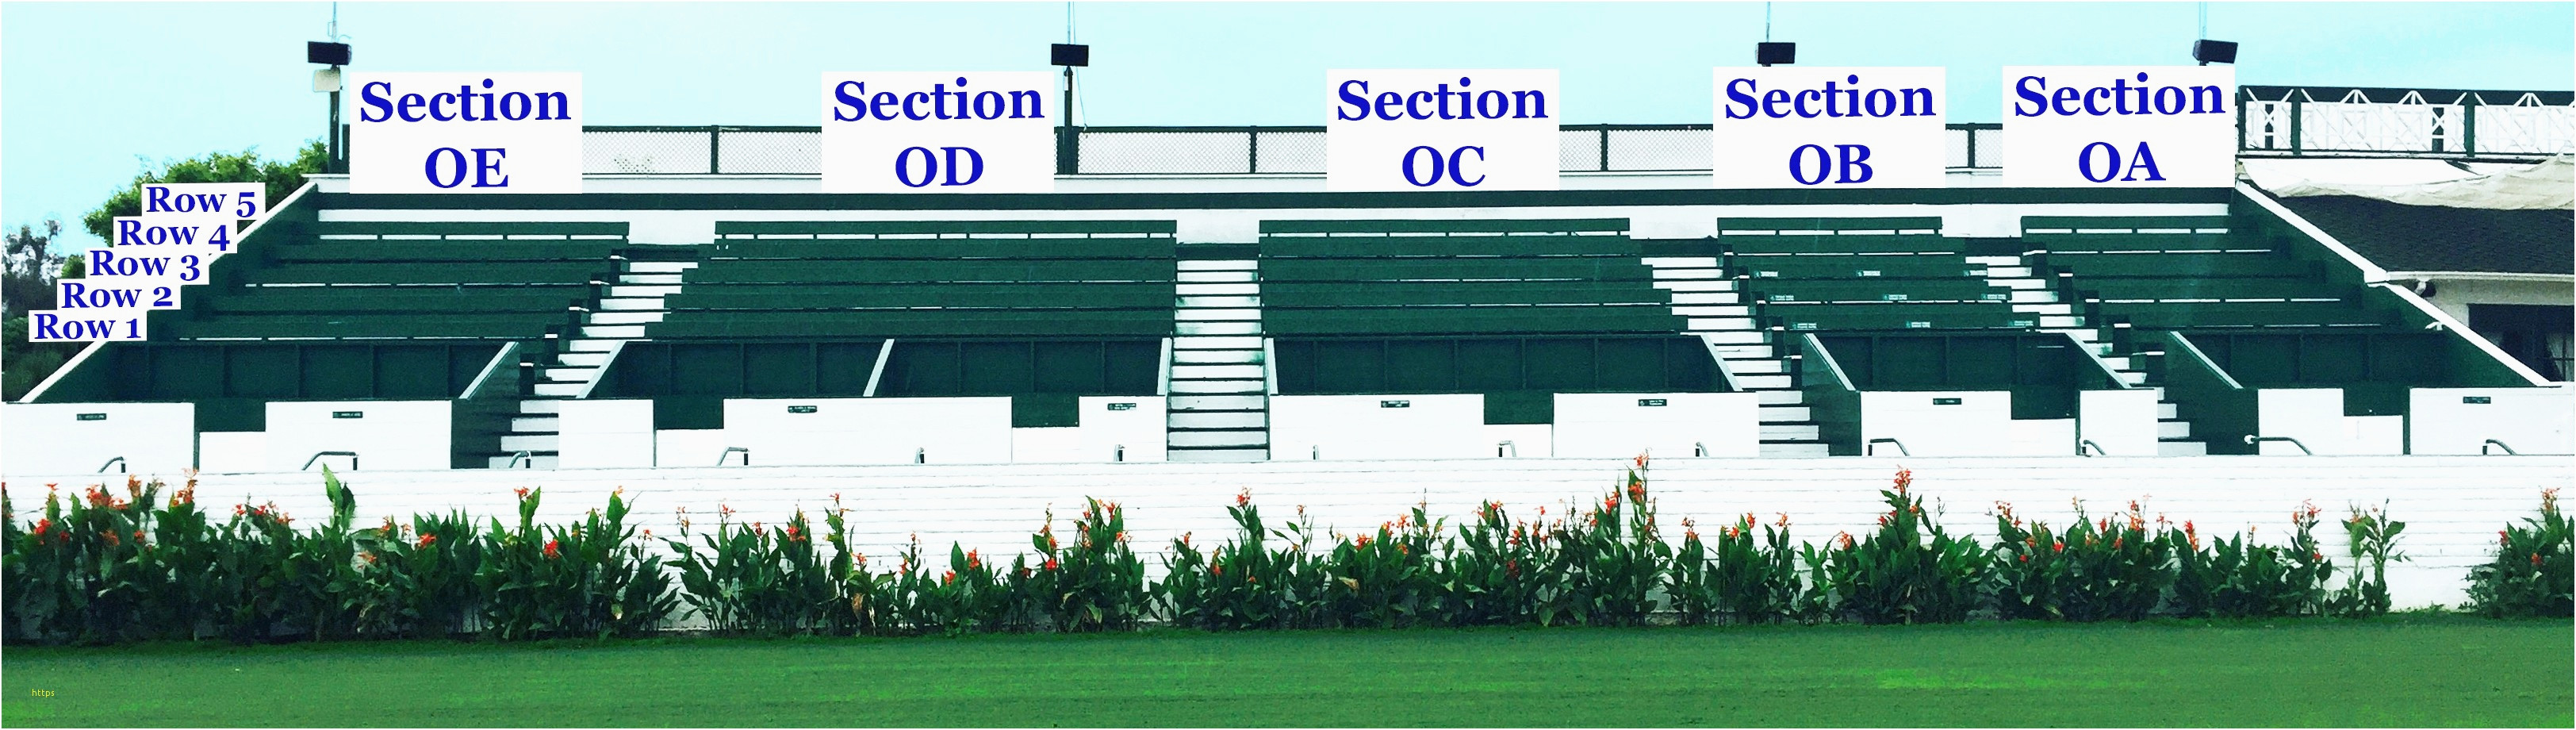 Nissan Stadium Seating Chart With Rows And Seat Numbers